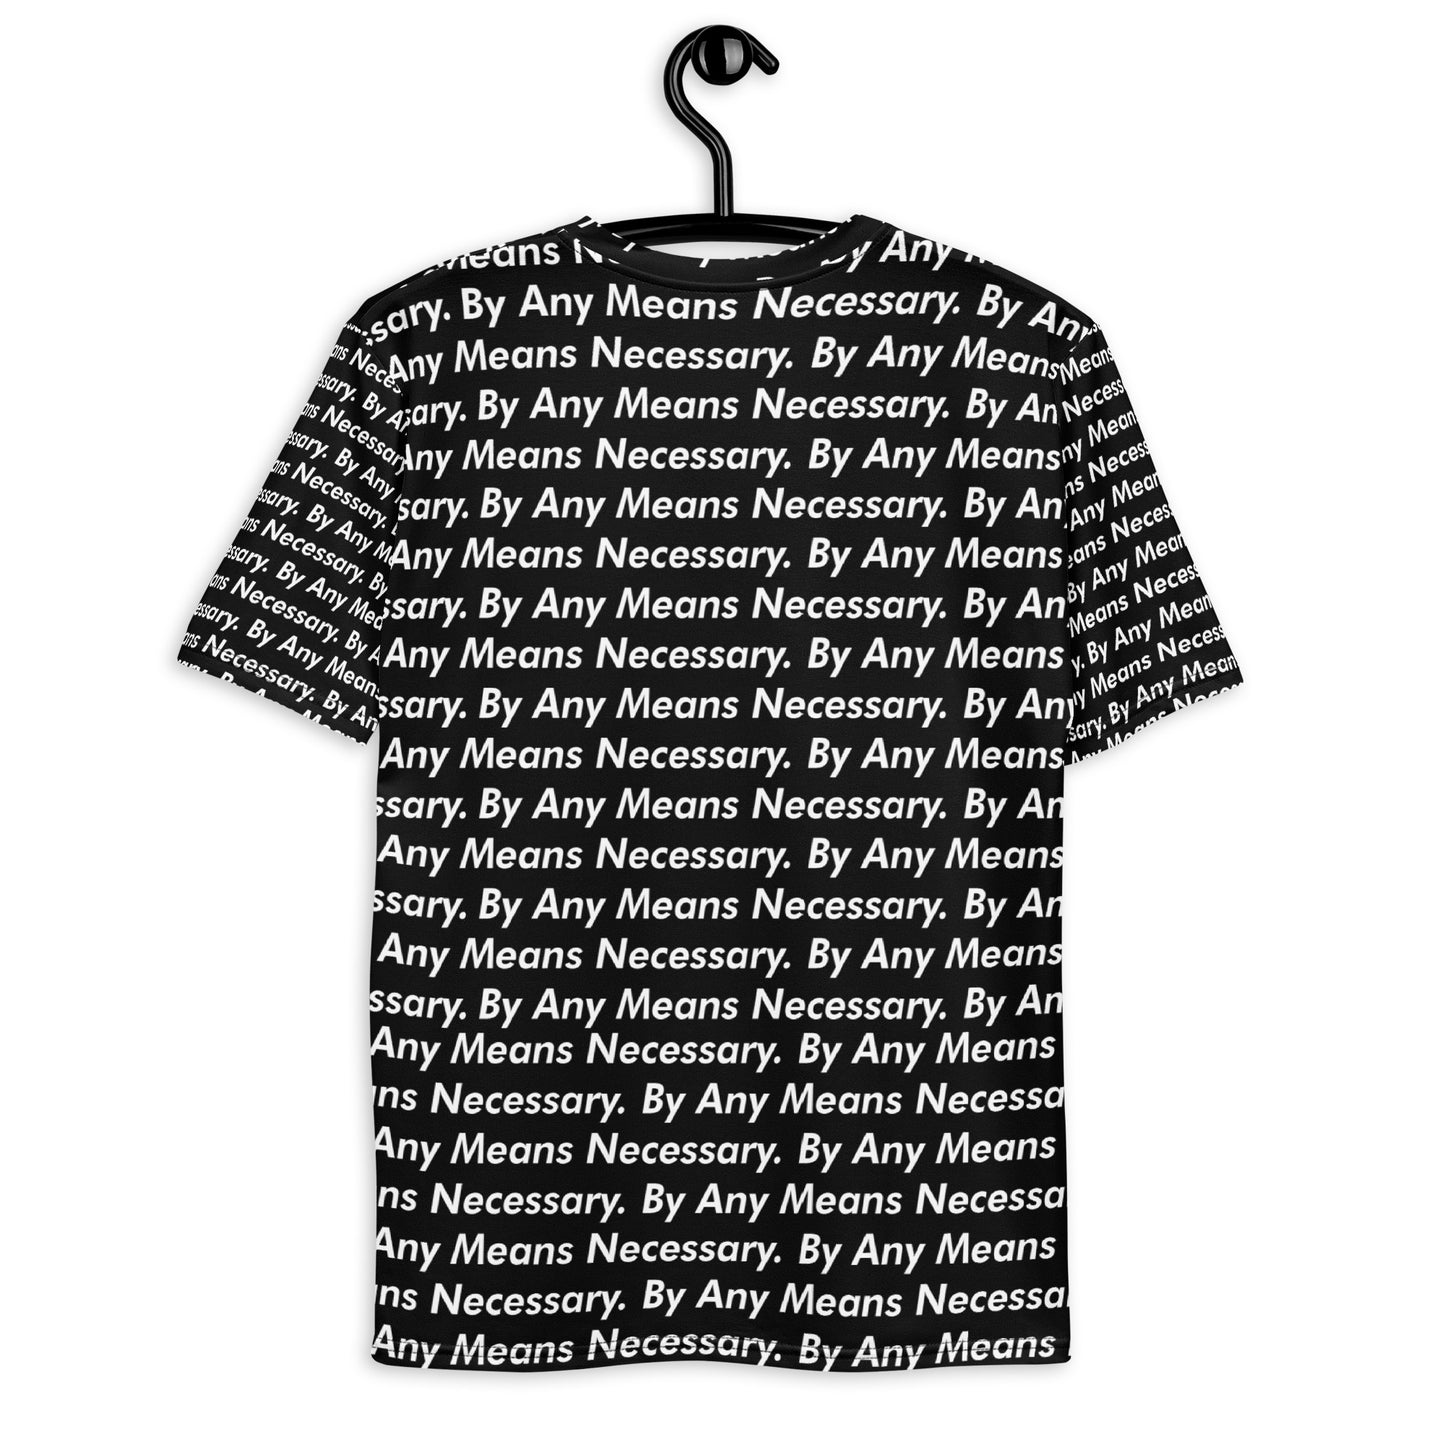 By any means Men's t-shirt